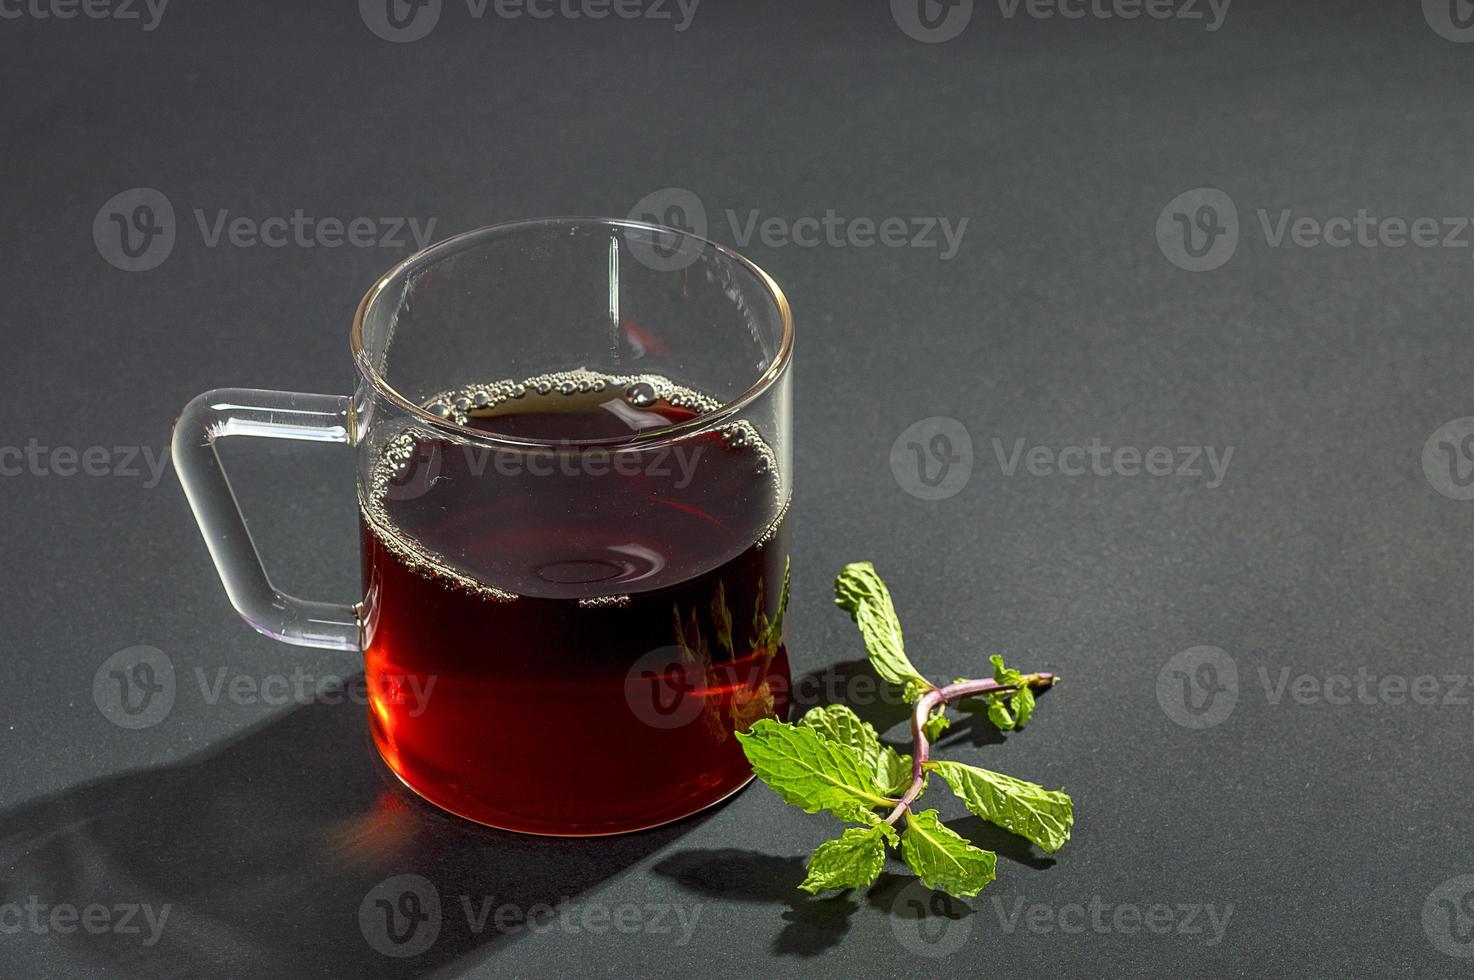 Cup of tea, mint and lemon on dark background photo